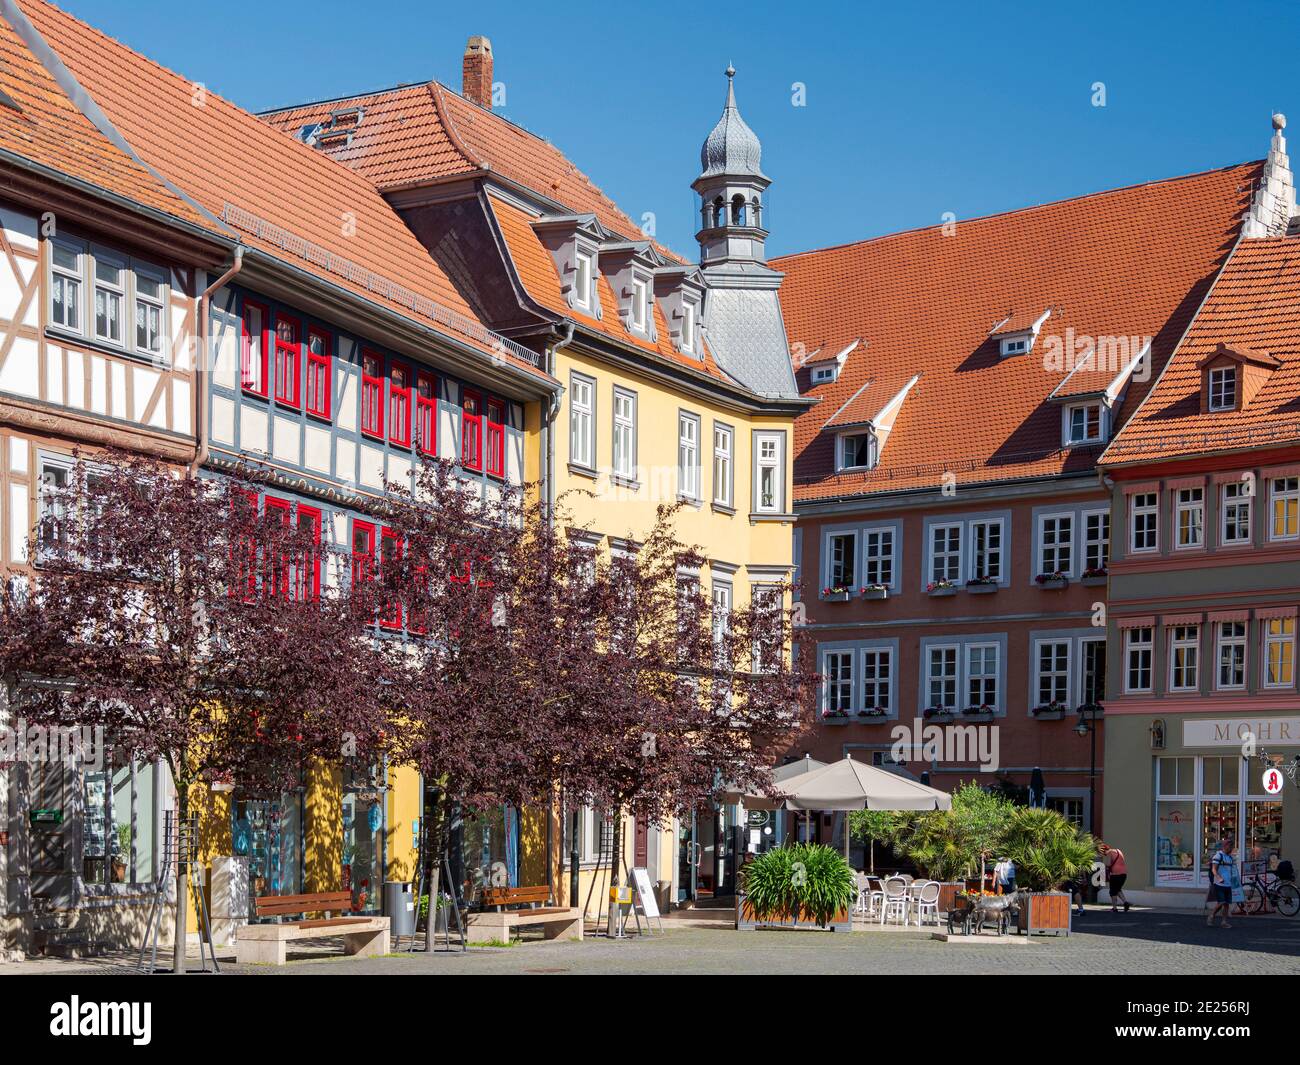 Old town houses buildt with traditionl timber framing at the square Neumarkt. The medieval town and spa Bad Langensalza in Thuringia. Europe, Central Stock Photo